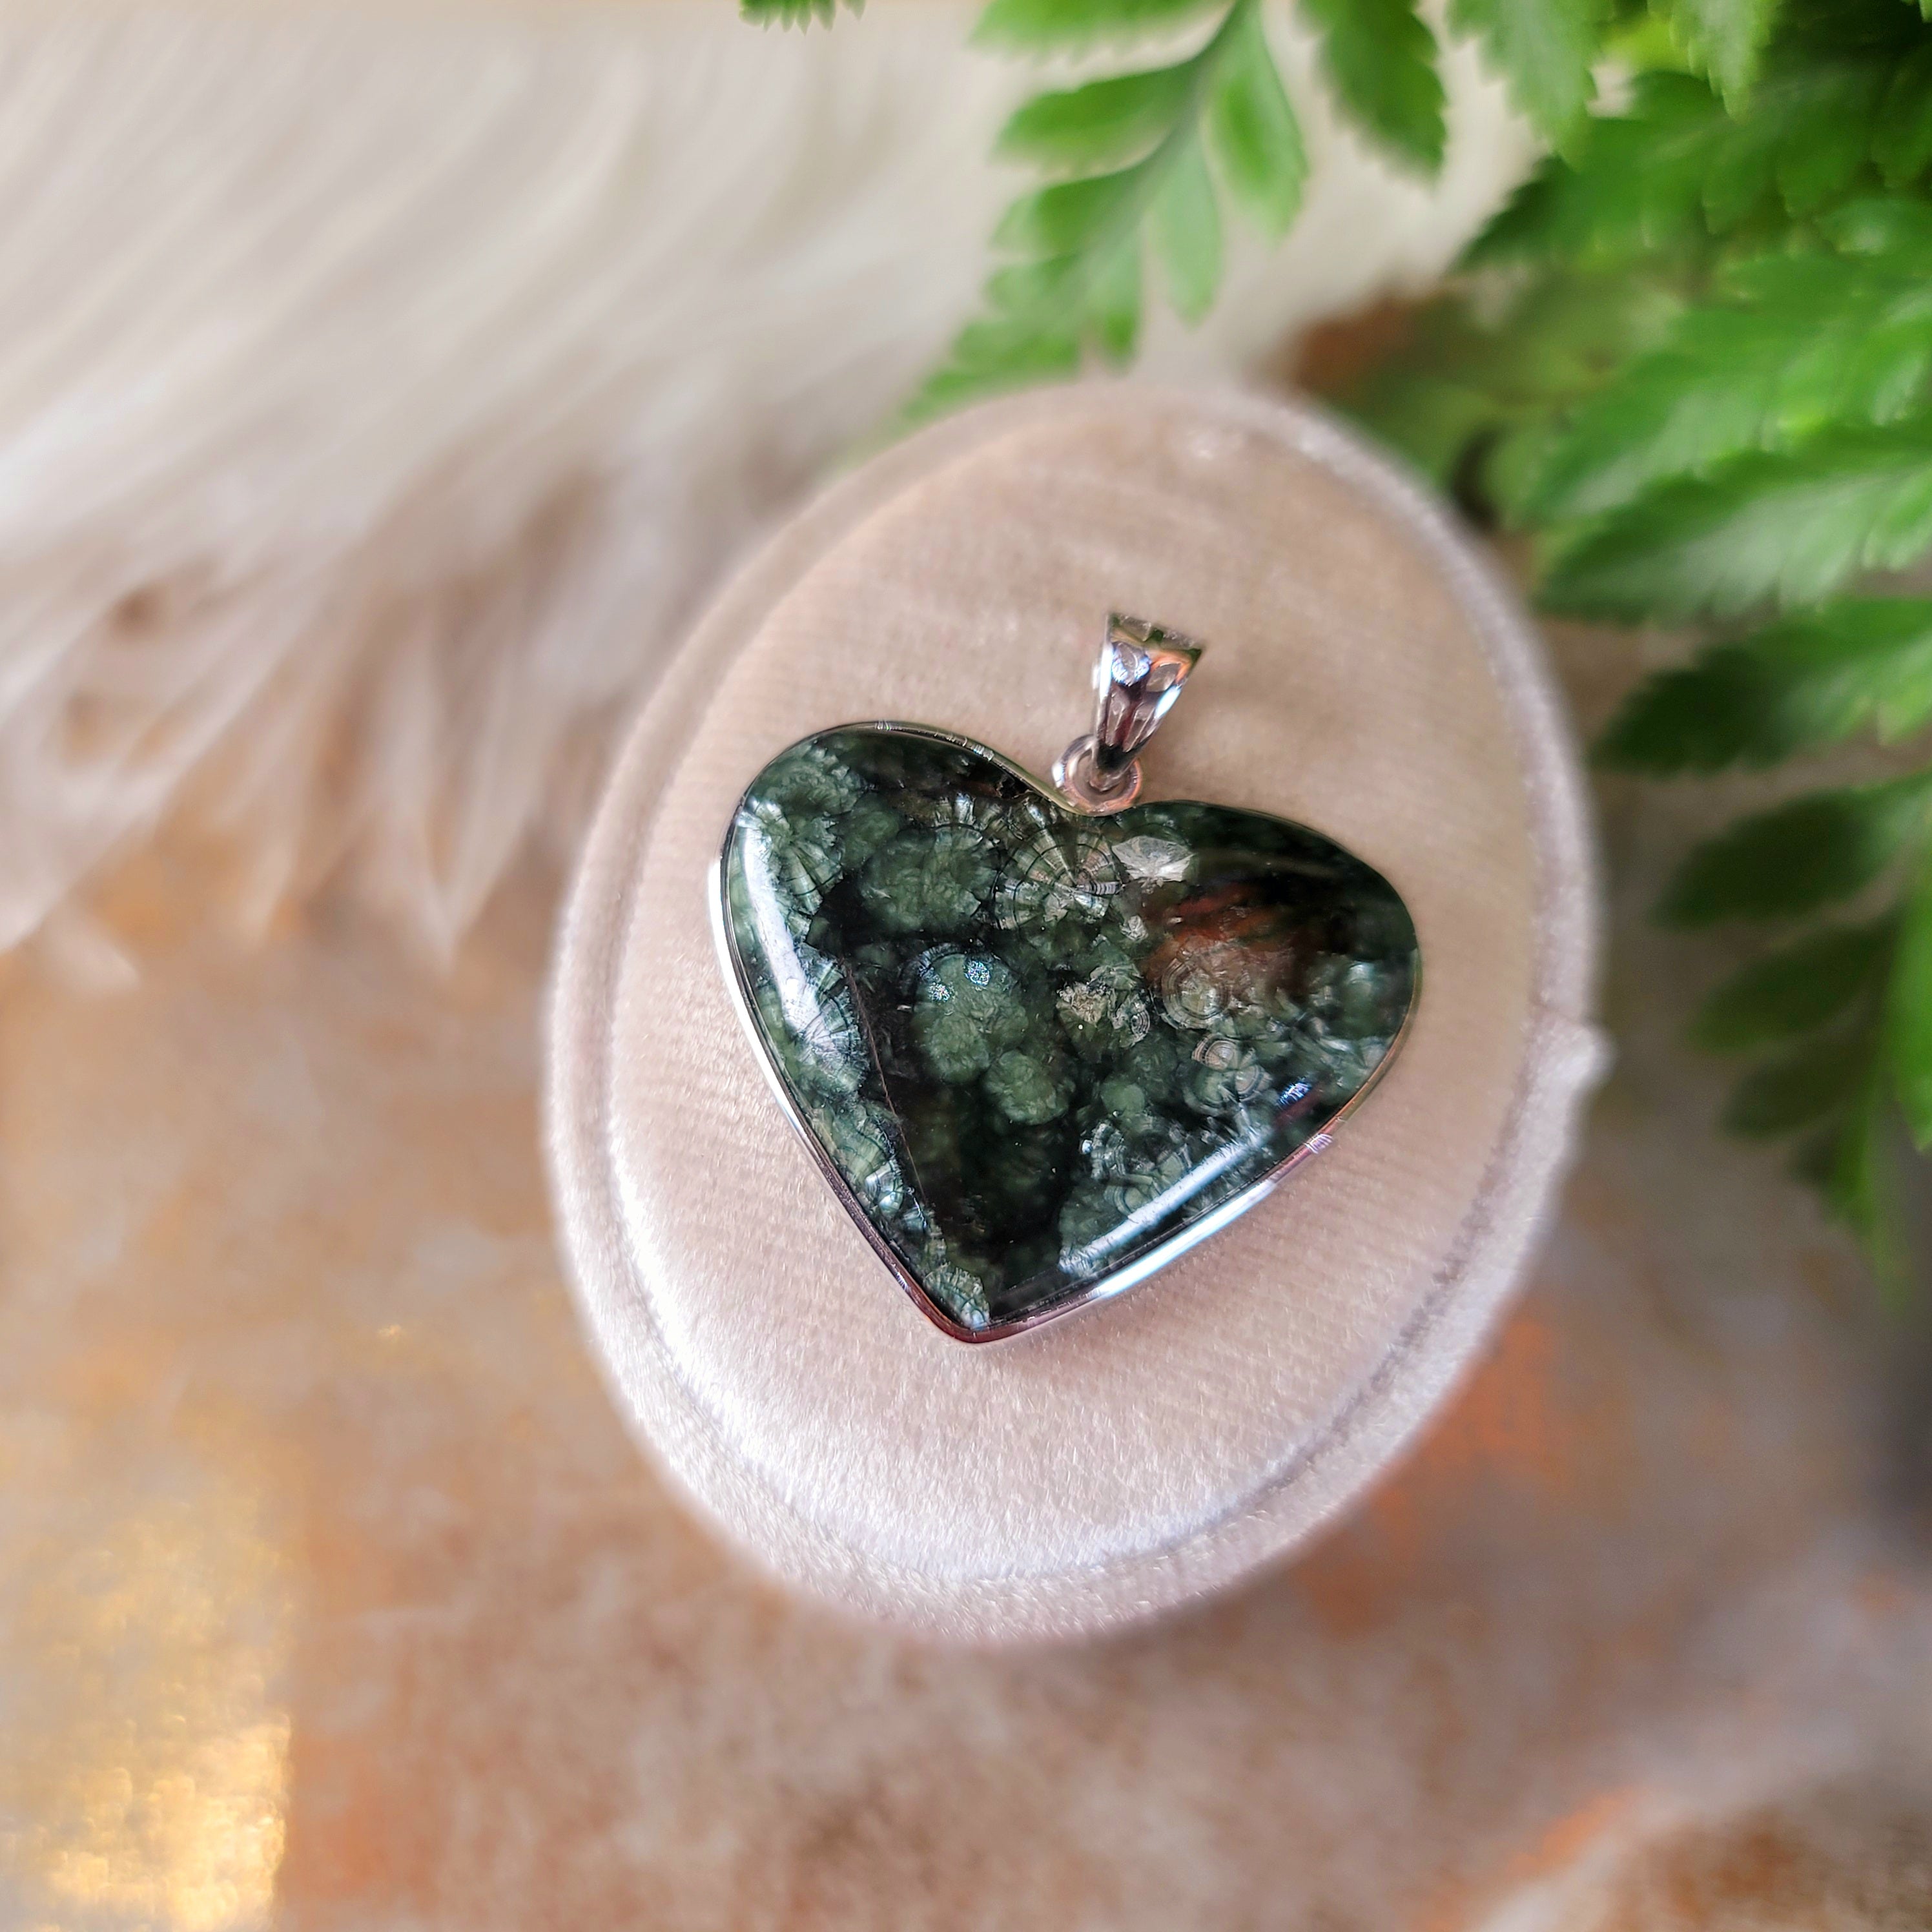 Seraphinite Pendant for Cleansing your Aura and Aligning your Chakras